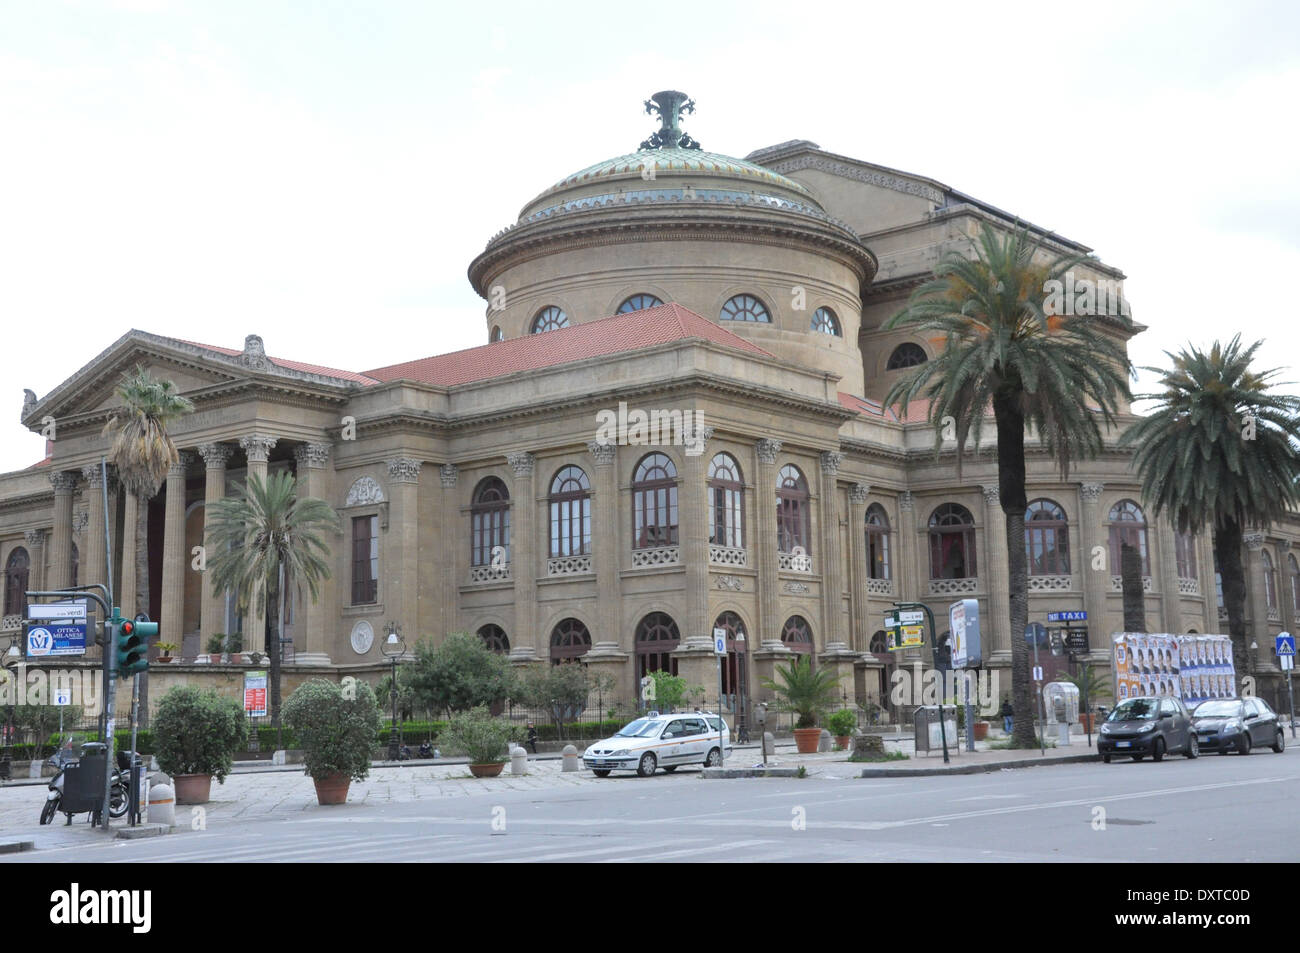 Teatro Massimo, Palermo, the largest opera house in Italy and third largest in Europe. Stock Photo